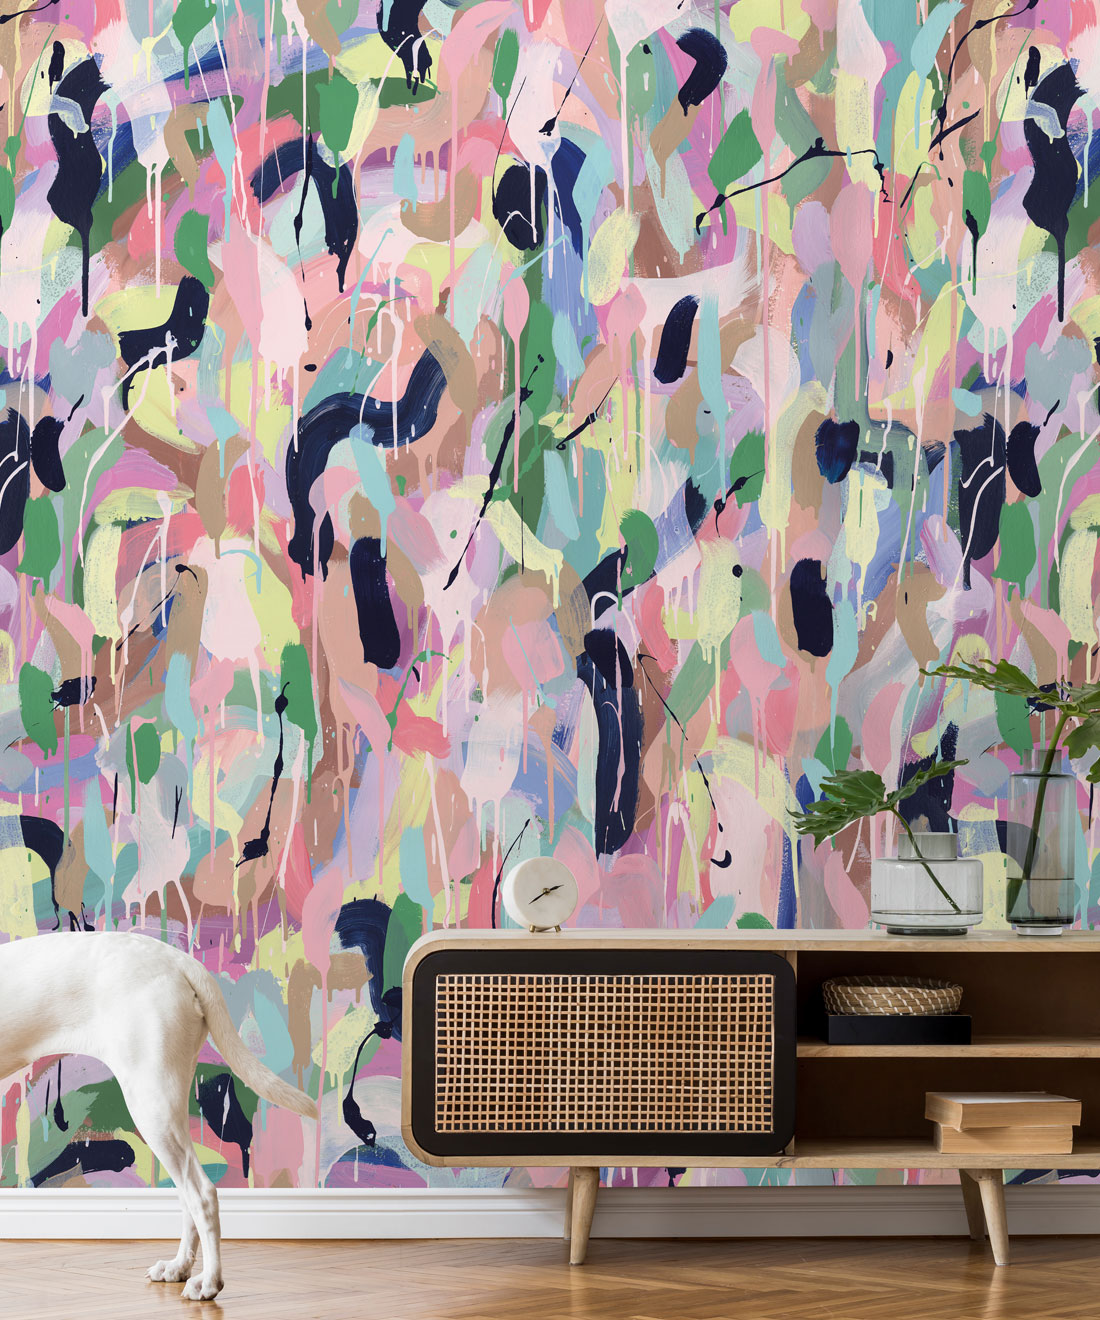 Between Tides Wallpaper • Colourful Painterly Wallpaper • Tiff Manuell • Abstract Expressionist Wallpaper • Close Up Insitu